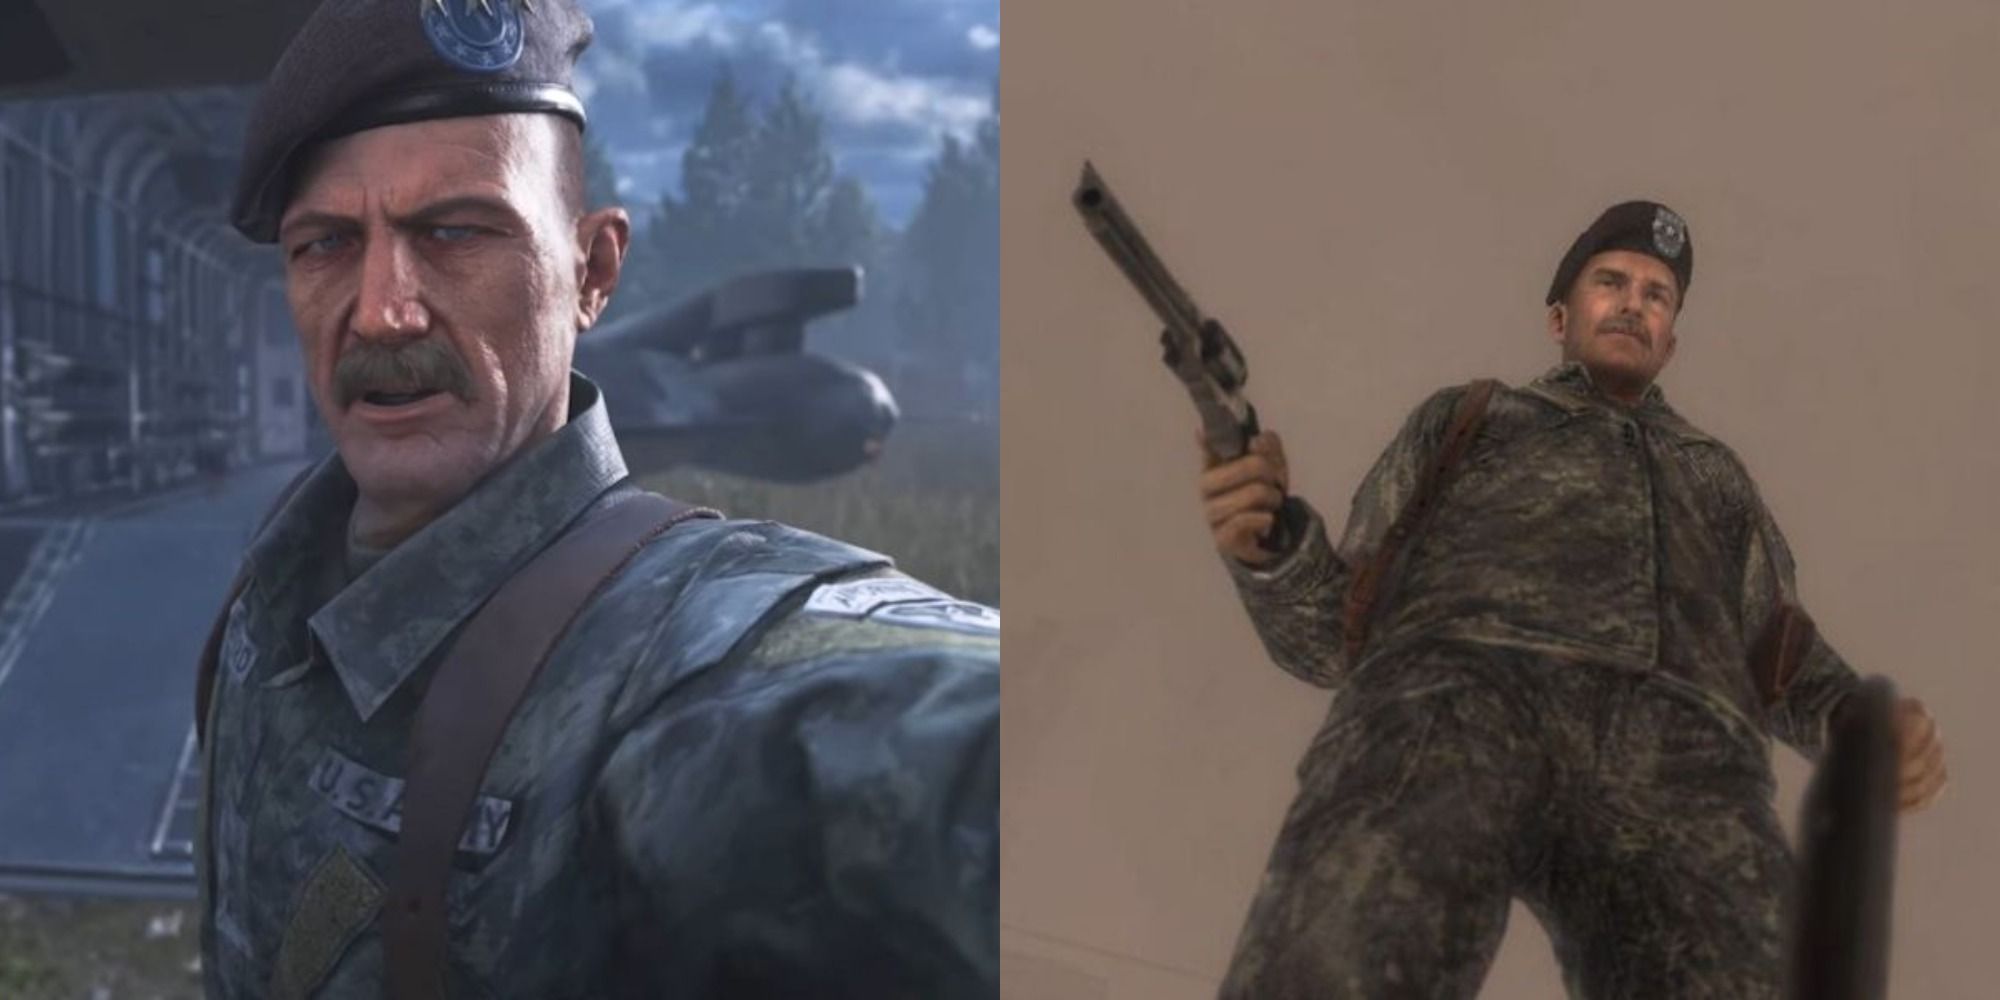 Split image showing Coronel Shepherd looking at the camera, and holding his gun